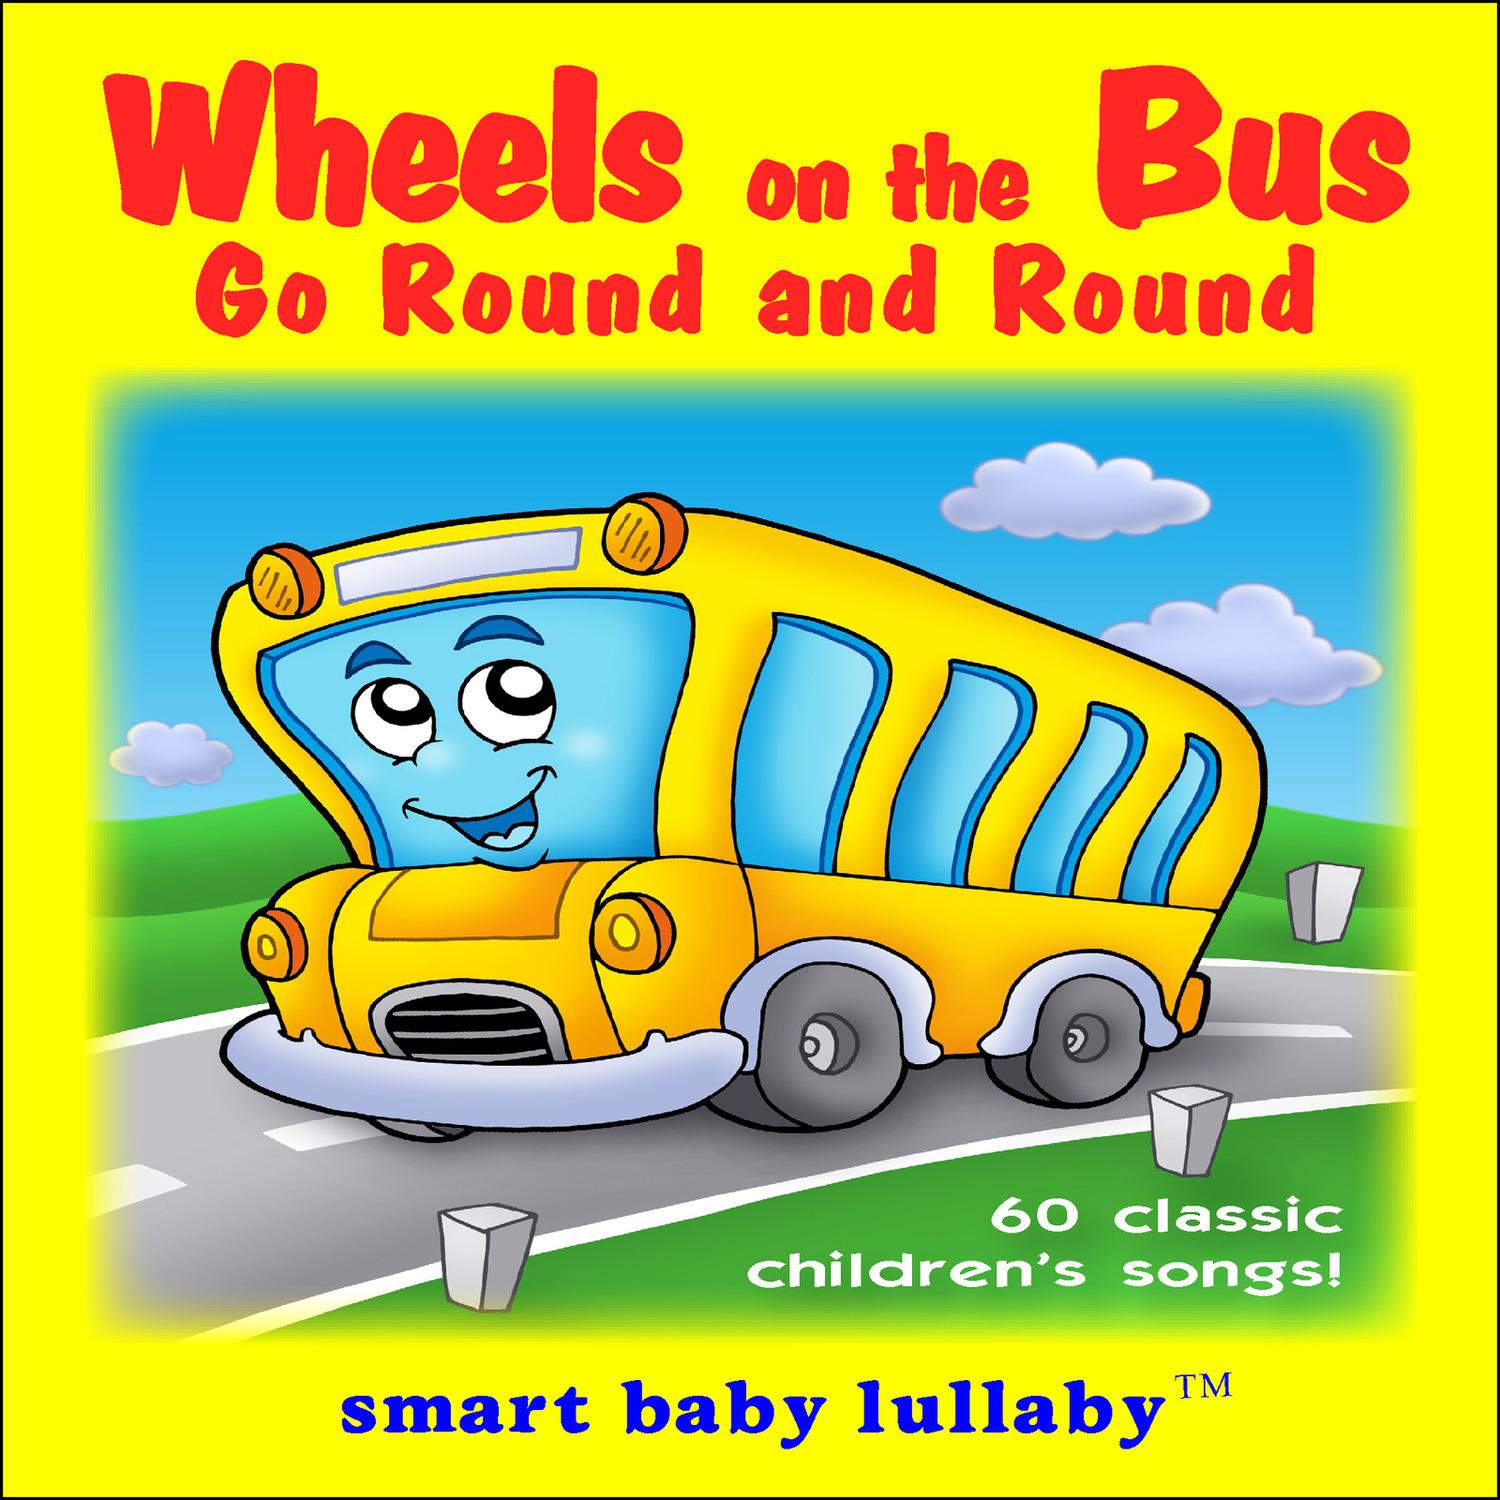 Smart Baby Lullaby - Home on the Range